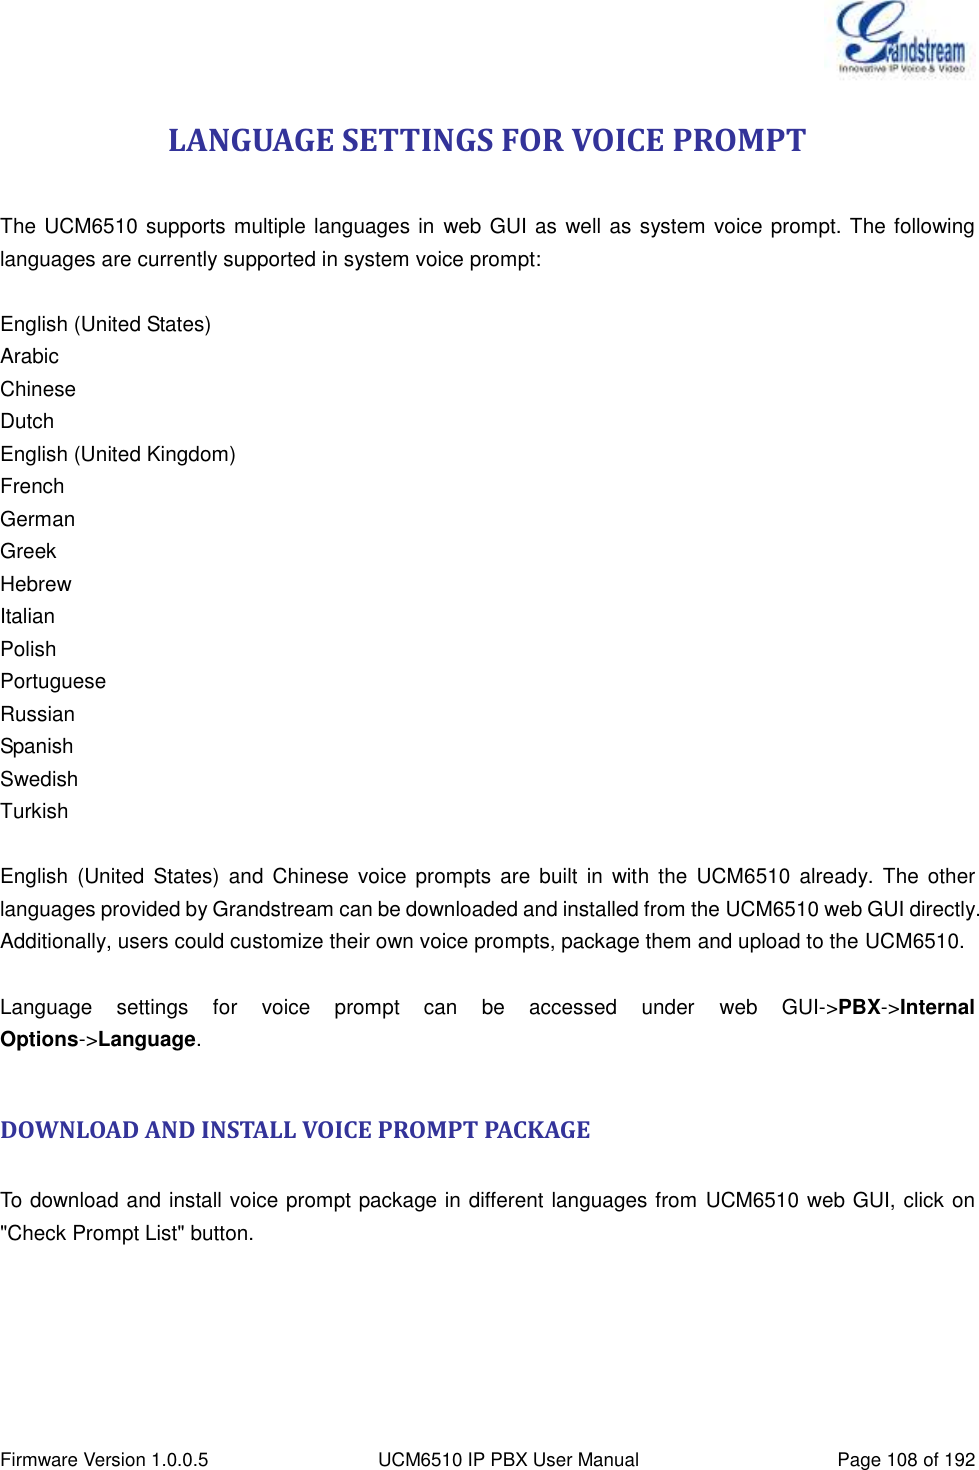  Firmware Version 1.0.0.5 UCM6510 IP PBX User Manual Page 108 of 192  LANGUAGE SETTINGS FOR VOICE PROMPT  The UCM6510 supports multiple languages in web GUI as well as system voice prompt. The following languages are currently supported in system voice prompt:  English (United States) Arabic Chinese Dutch English (United Kingdom) French German Greek Hebrew Italian Polish Portuguese Russian Spanish Swedish Turkish  English  (United  States)  and  Chinese  voice  prompts  are  built  in  with  the  UCM6510  already.  The other languages provided by Grandstream can be downloaded and installed from the UCM6510 web GUI directly. Additionally, users could customize their own voice prompts, package them and upload to the UCM6510.  Language  settings  for  voice  prompt  can  be  accessed  under  web  GUI-&gt;PBX-&gt;Internal Options-&gt;Language.  DOWNLOAD AND INSTALL VOICE PROMPT PACKAGE  To download and install voice prompt package in different languages from UCM6510 web GUI, click on &quot;Check Prompt List&quot; button. 